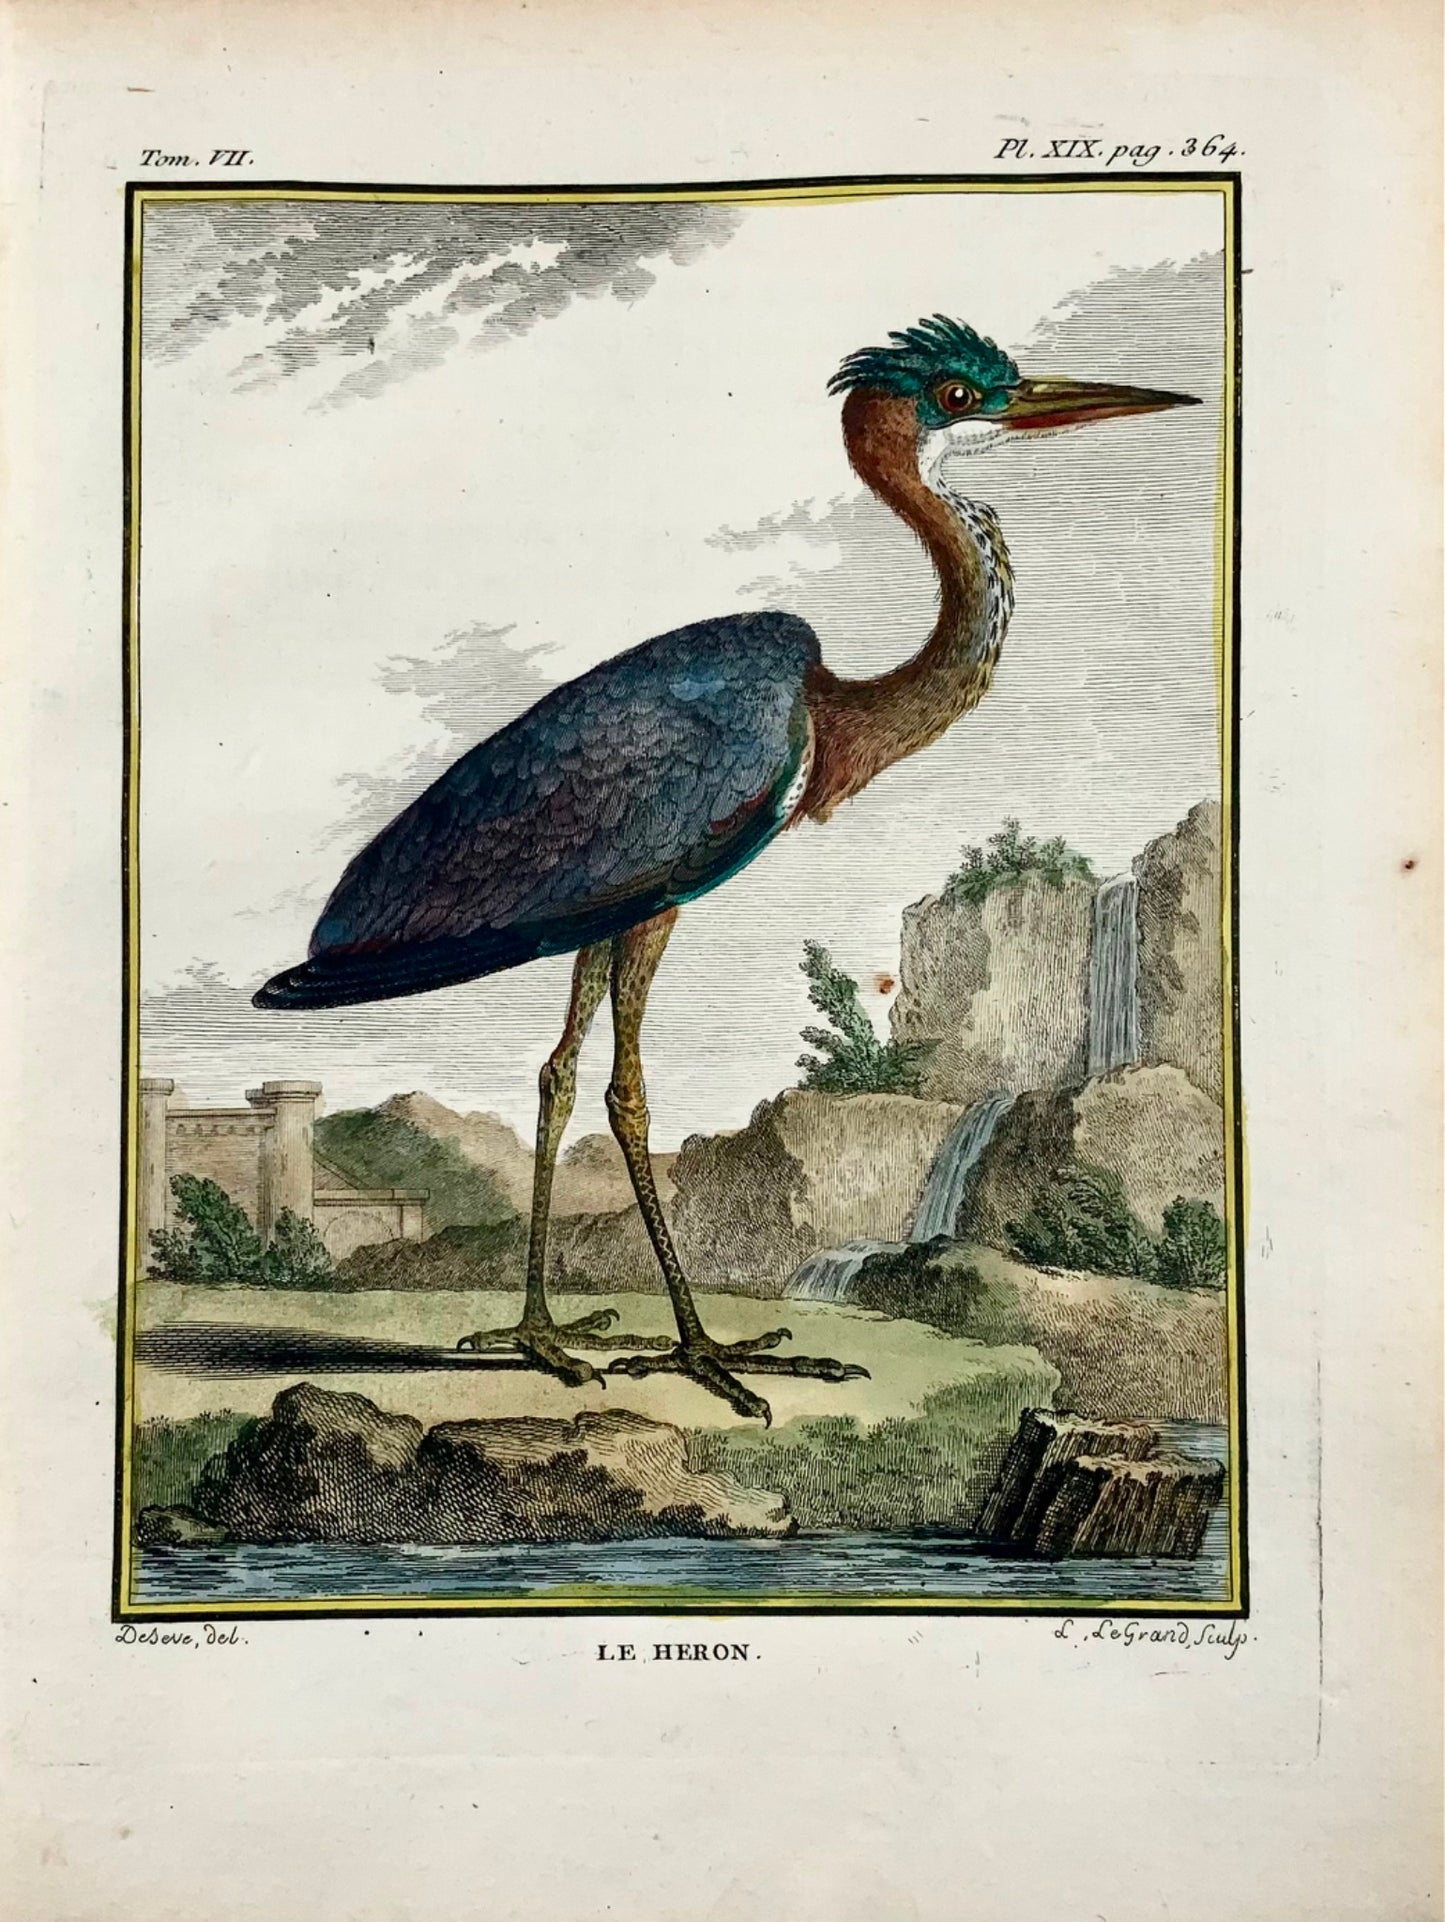 1779 Le Grand after de Seve, Heron, ornithology, large 4to edition, engraving